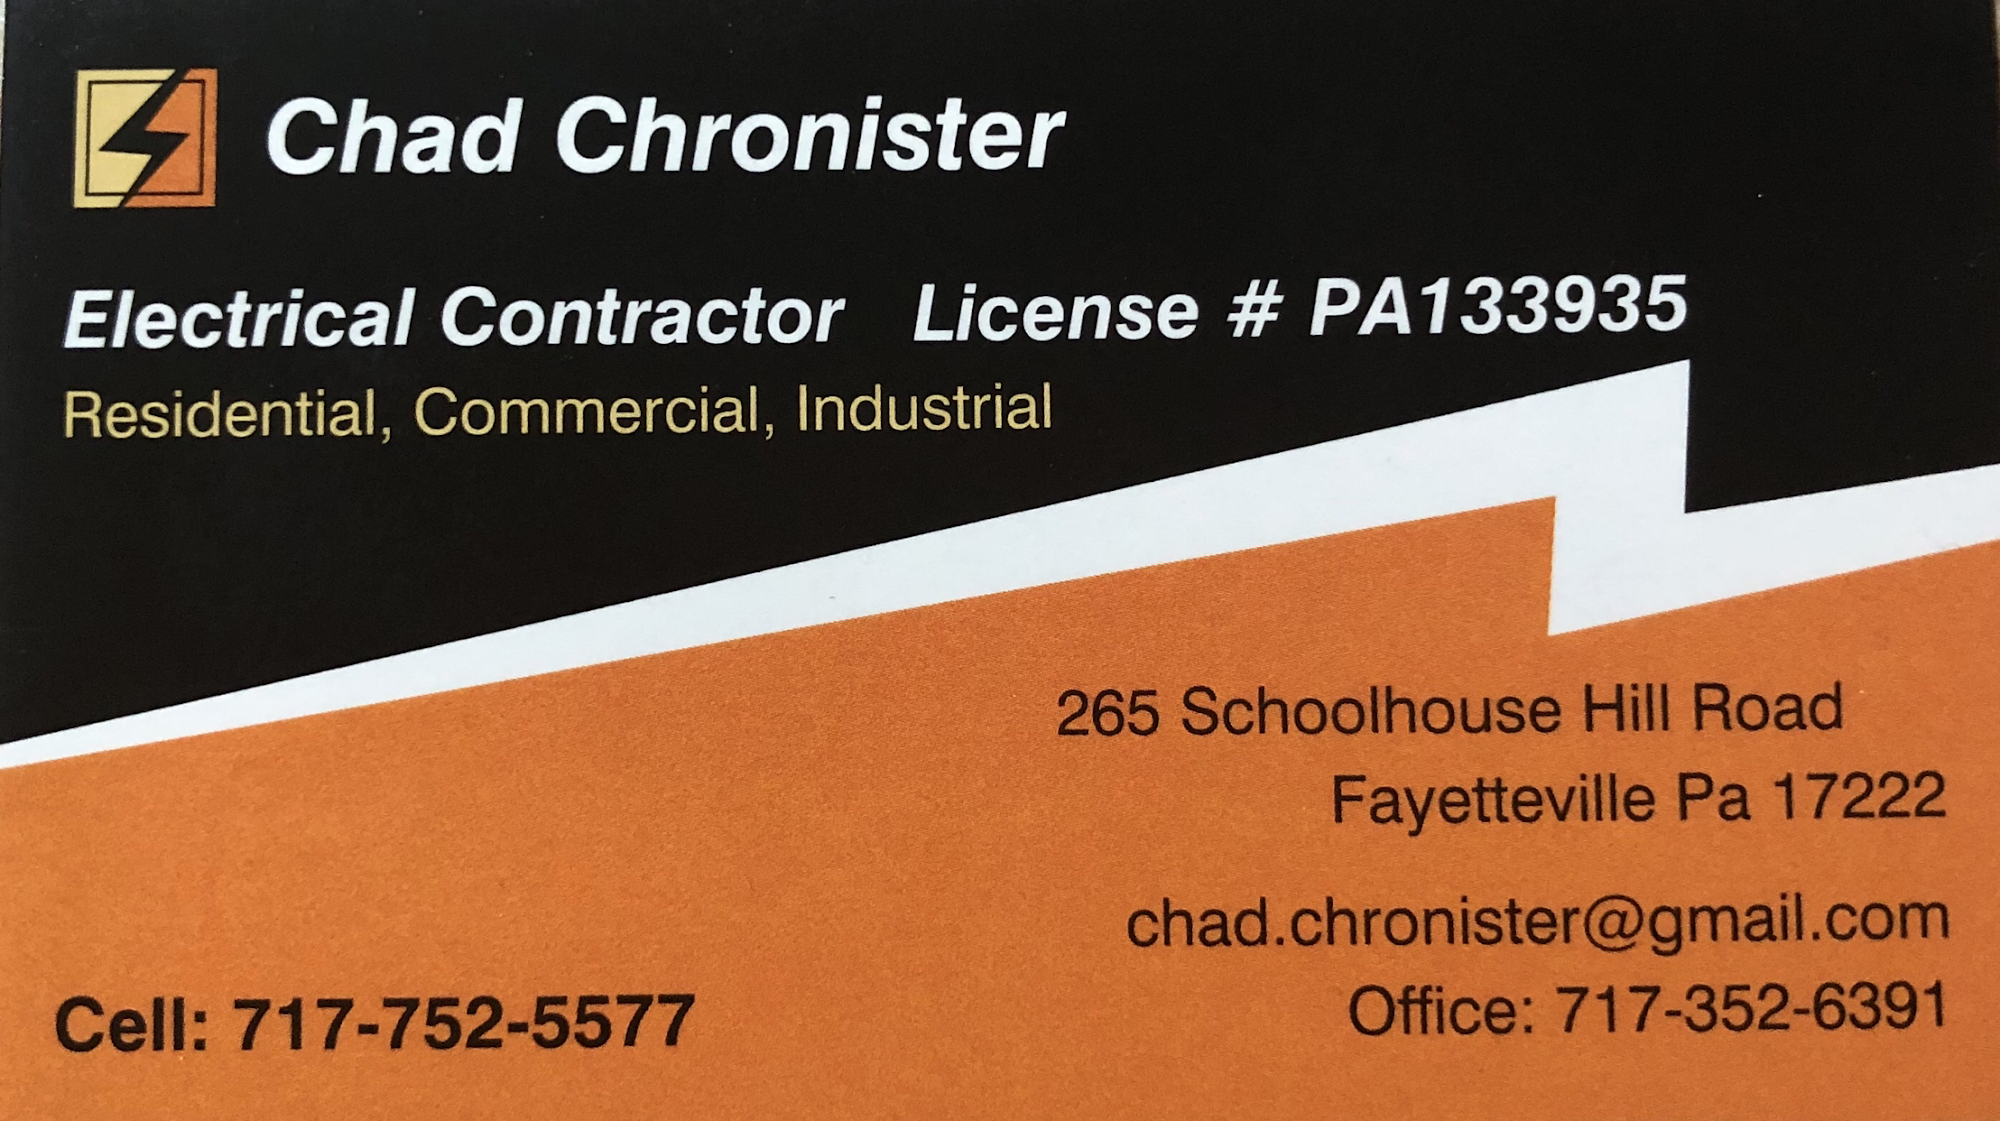 Chad Chronister Electrical Service 265 Schoolhouse Hill Rd, Fayetteville Pennsylvania 17222